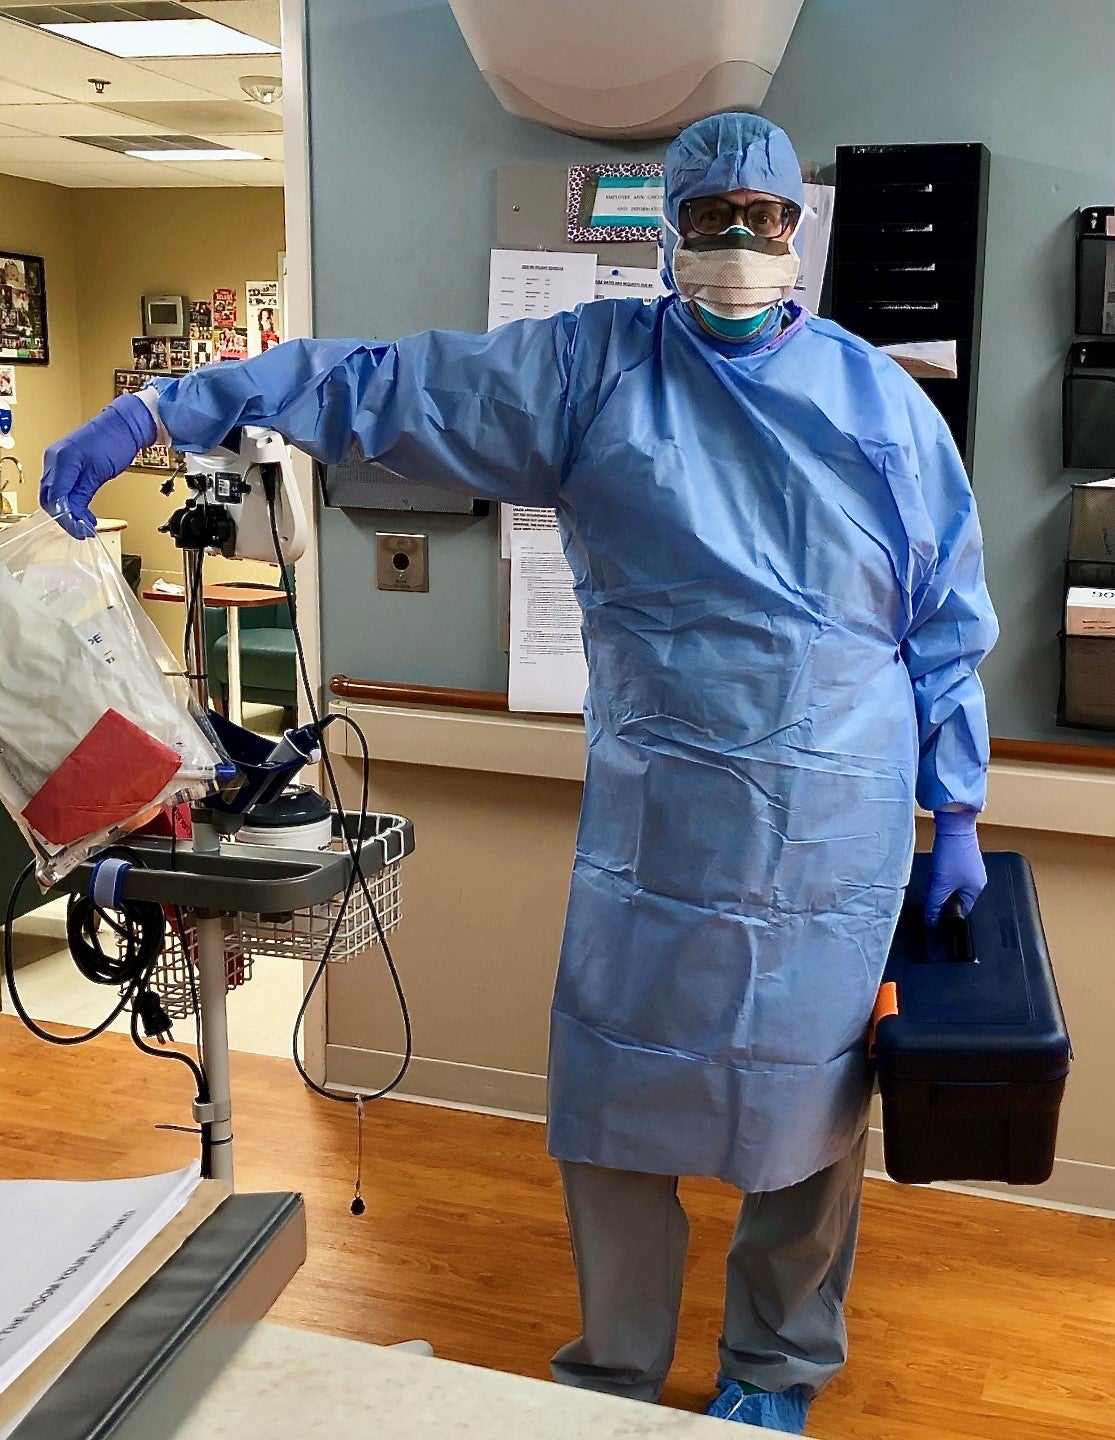 Mike stands with a videoscope station and holds a toolbox while dressed in protective equipment. He is about to assess a patient with suspected COVID-19